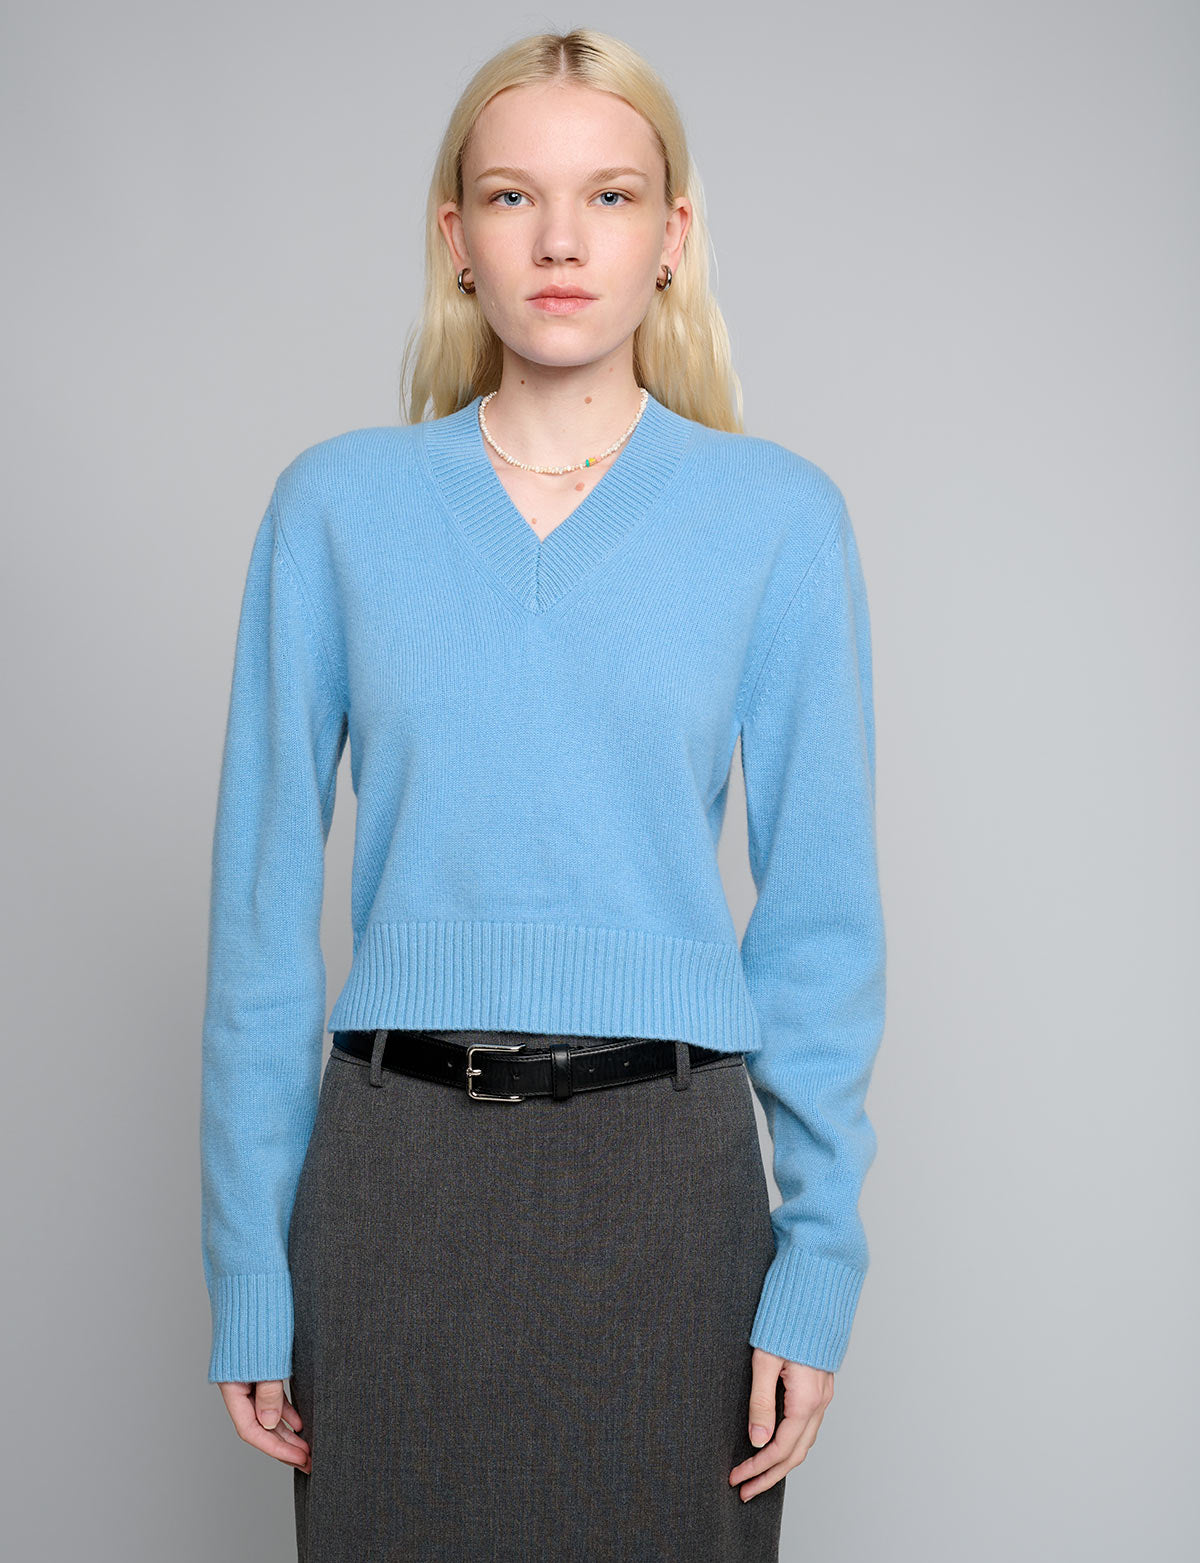 Periwinkle Cropped V-Neck Sweater